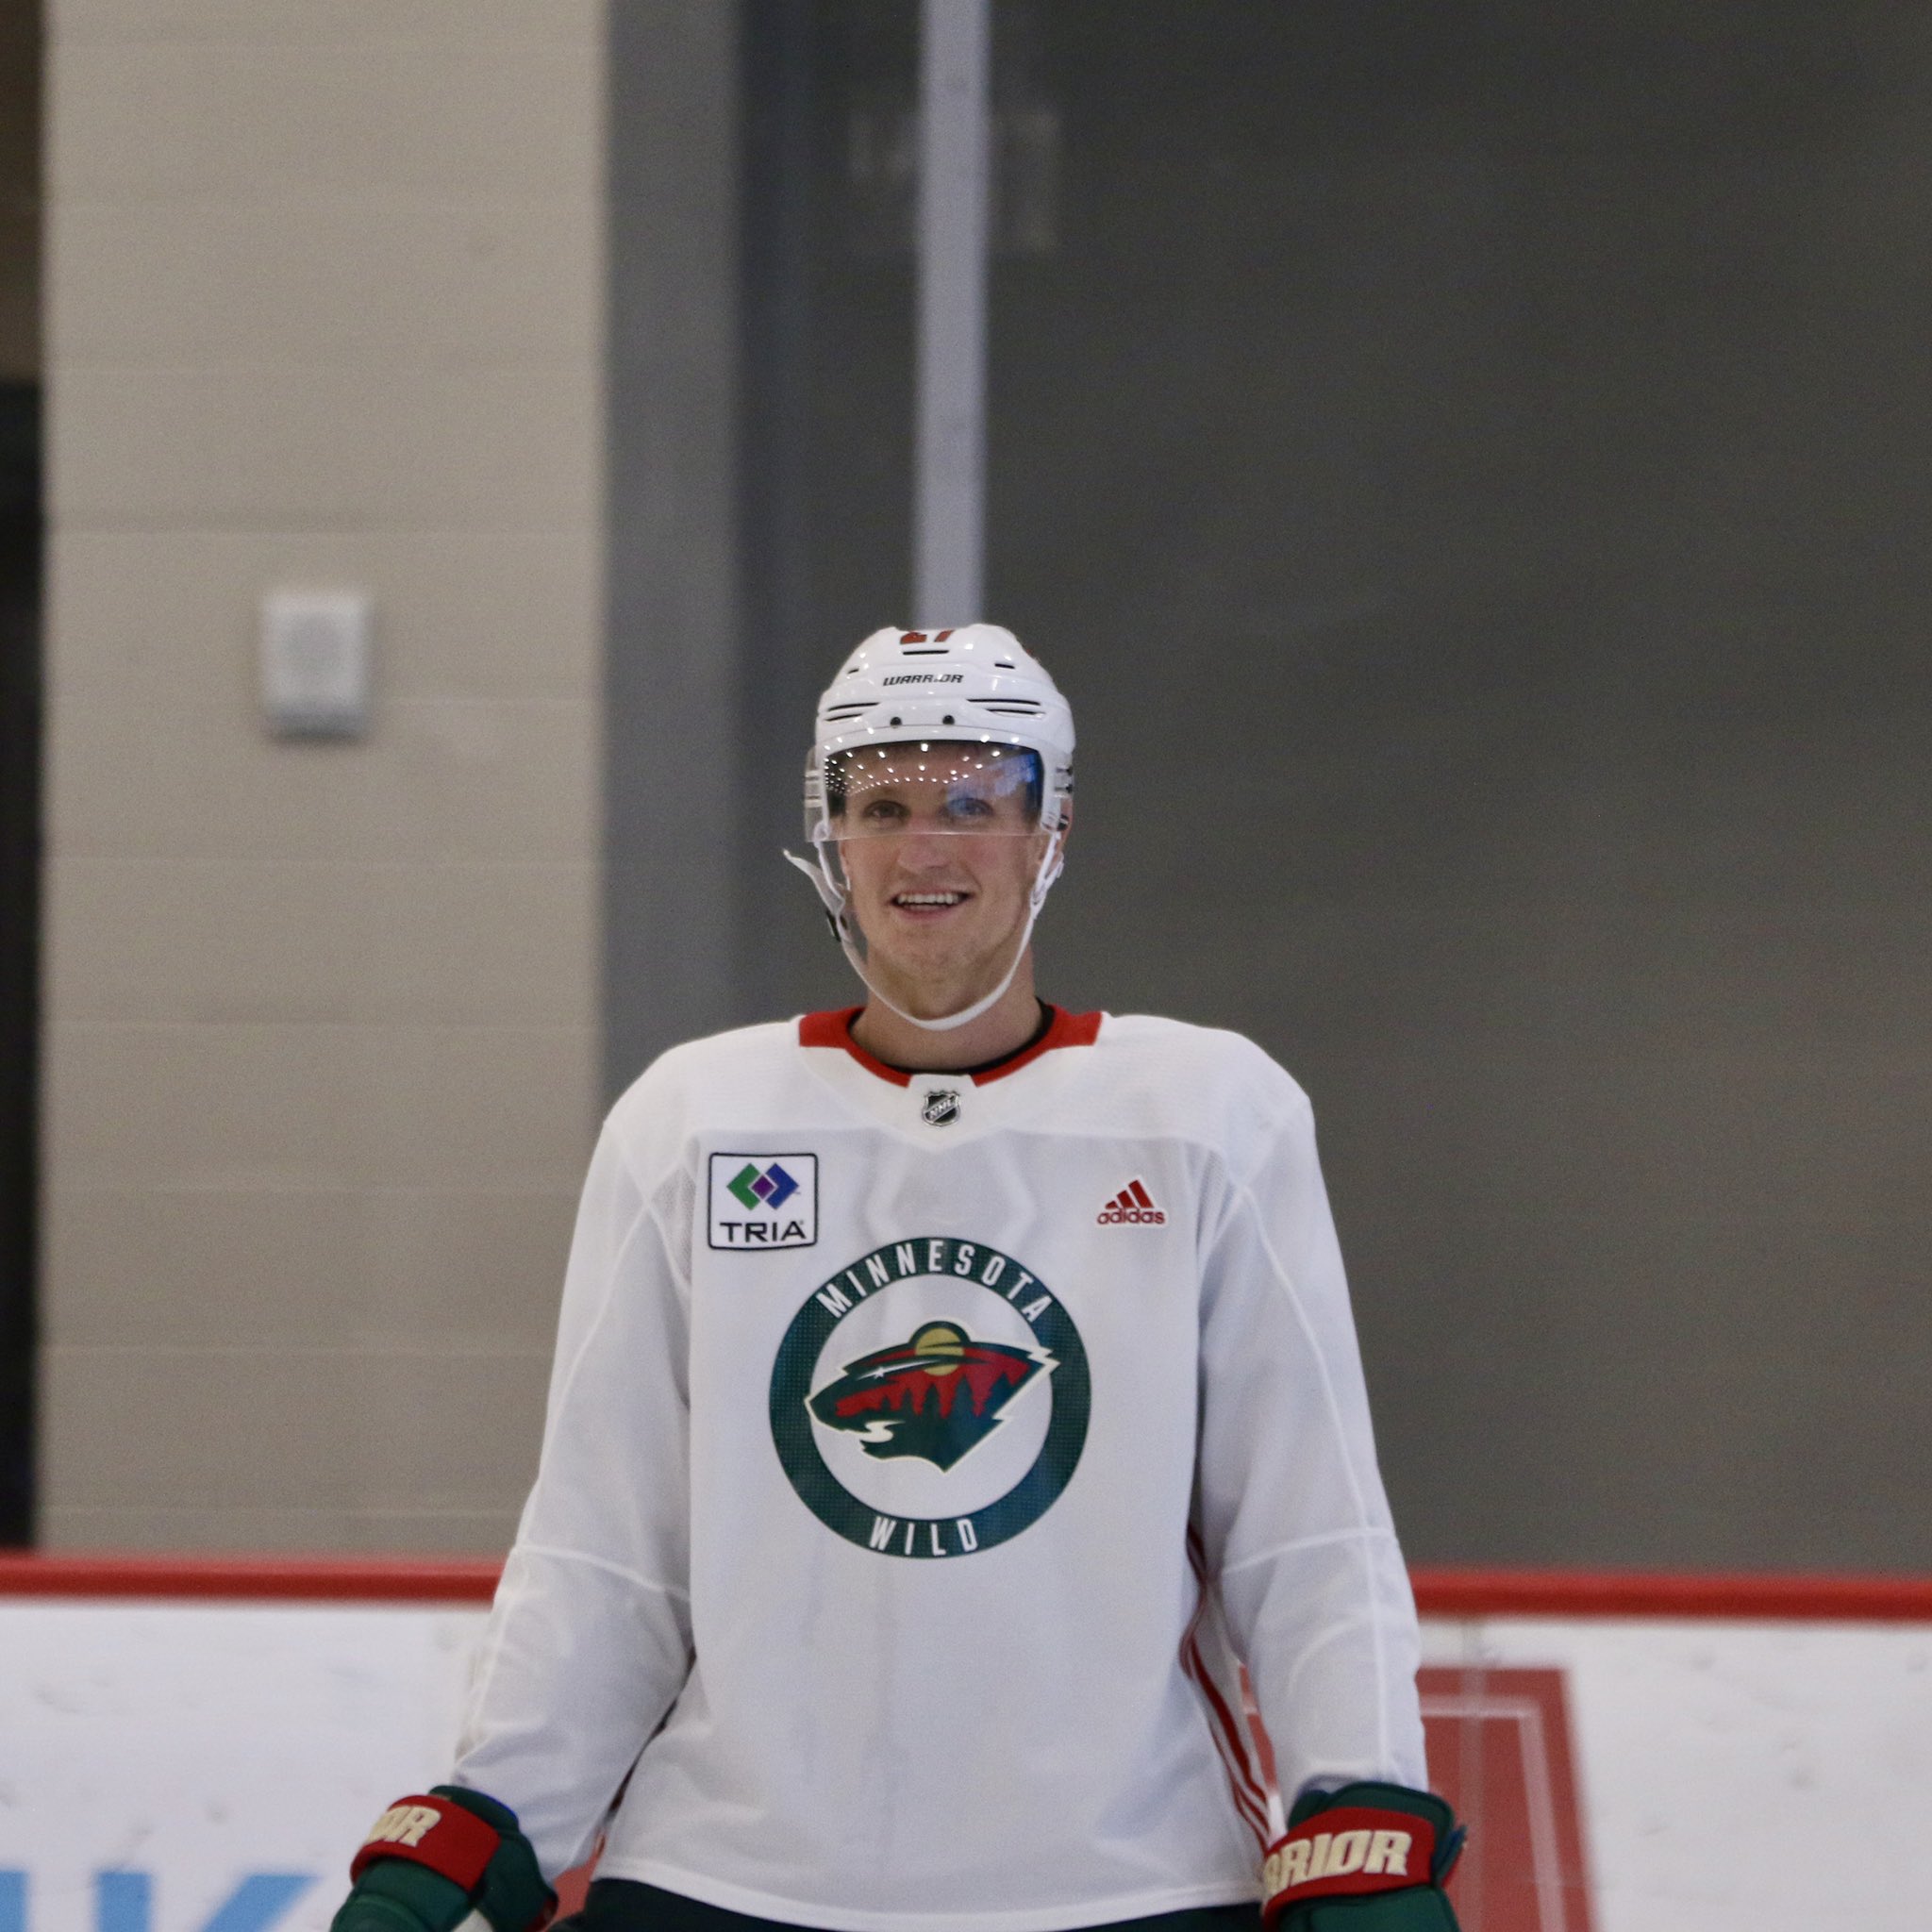 Minnesota Wild on X: Kirill: I just like to smile. Smiling's my  favorite! 😁 #mnwild  / X